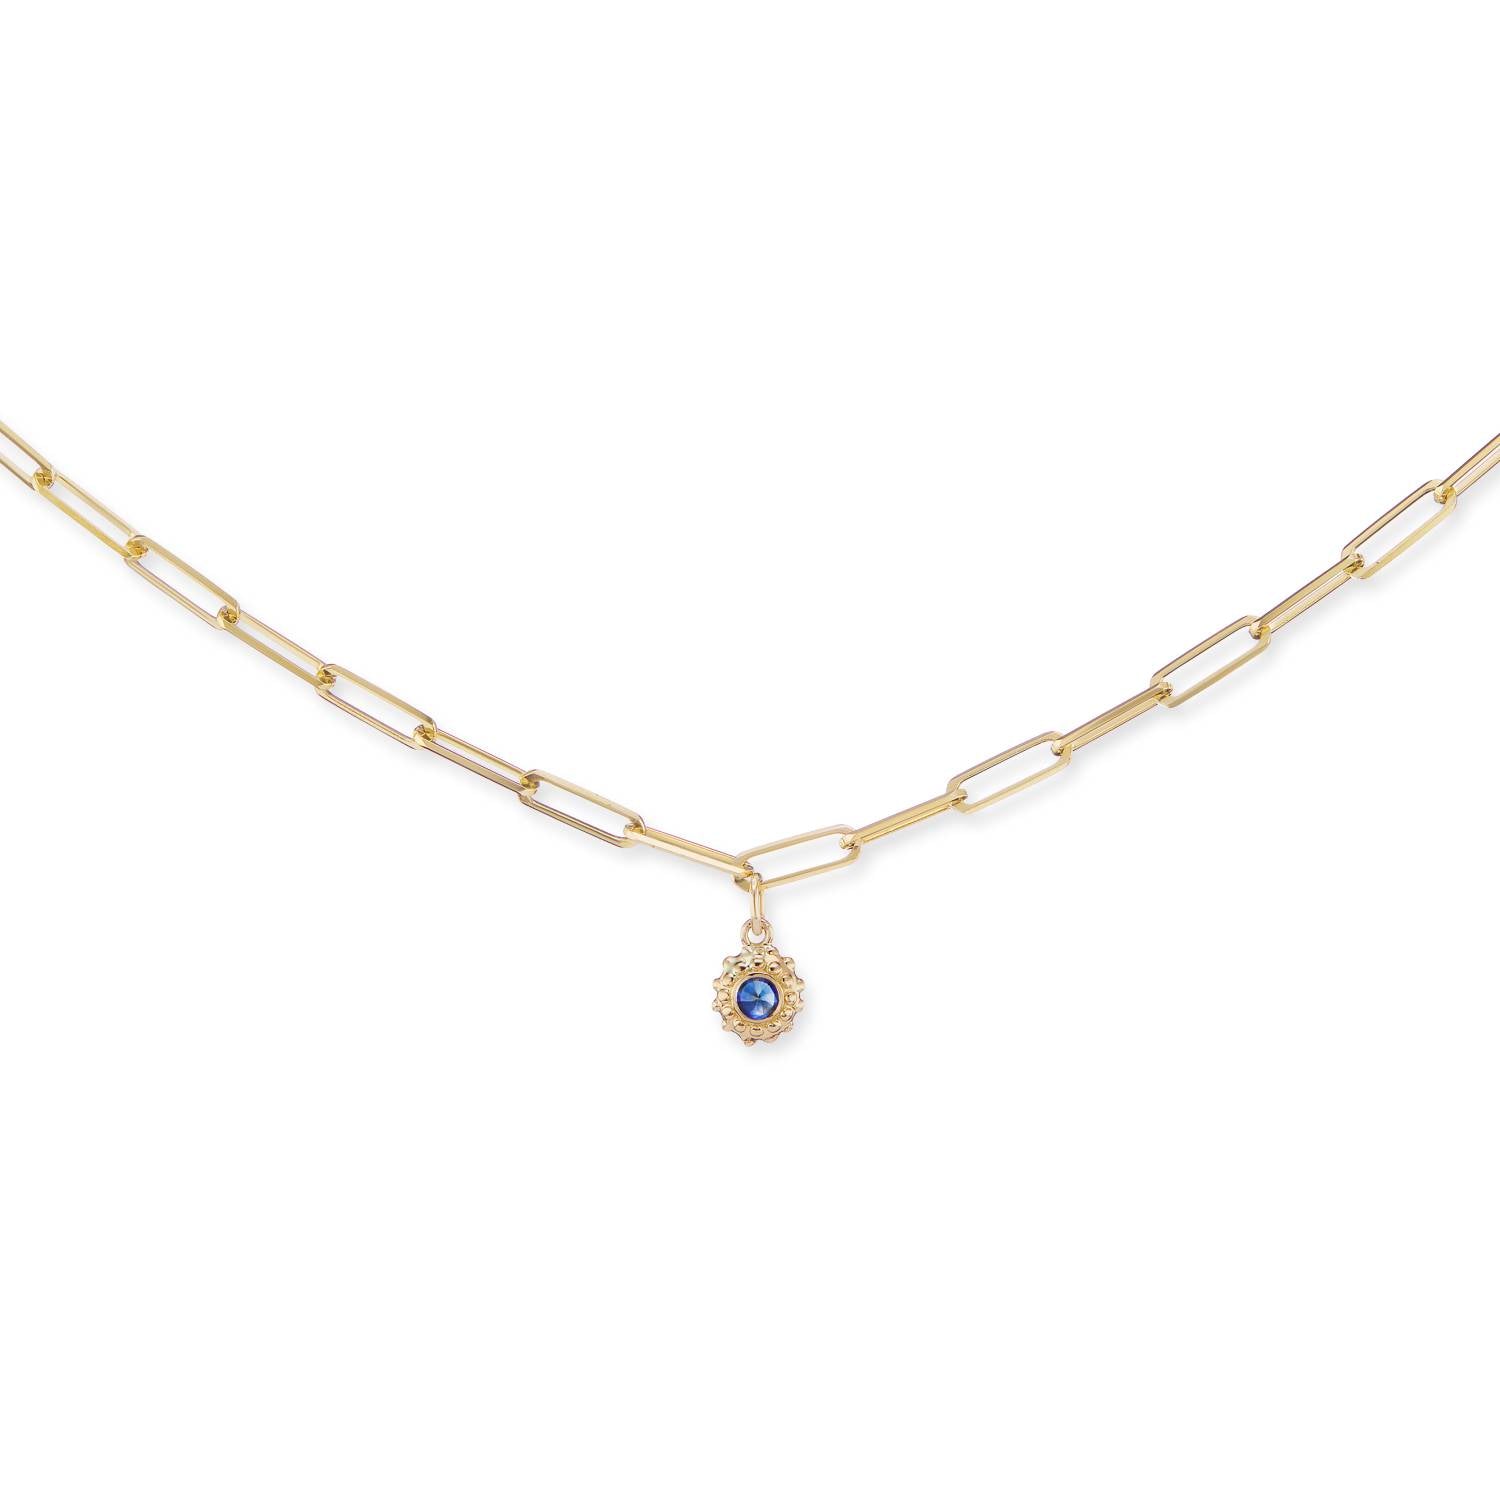 14Kt Gold Antique Reproduction Diamond and Sapphire Necklace – Rubini Inc.